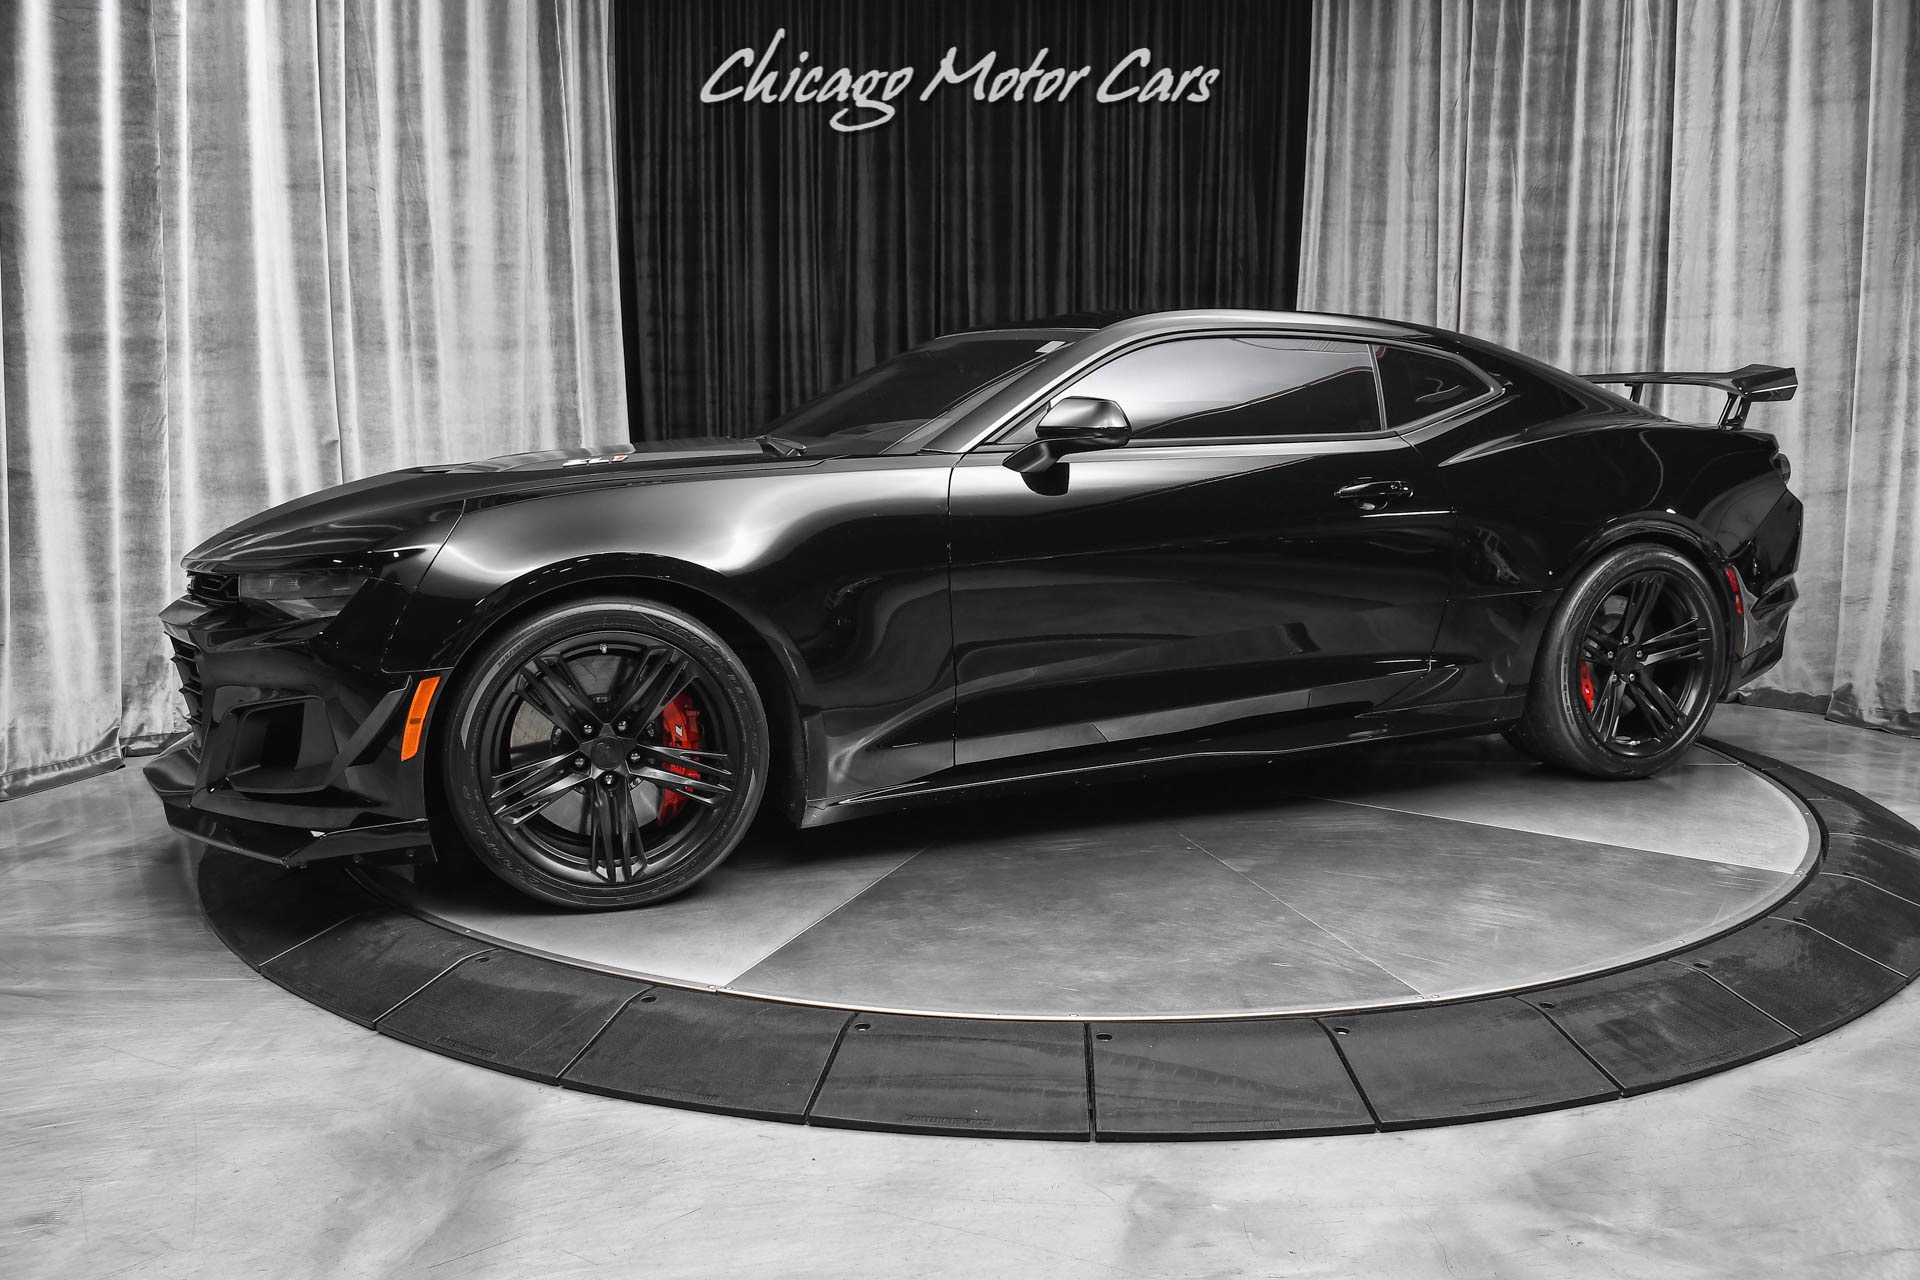 Used 2019 Chevrolet Camaro ZL1 1LE TRACK PACK! 10-SPEED AUTO! LOW MILES!  FRONT PPF! For Sale (Special Pricing) | Chicago Motor Cars Stock #19019